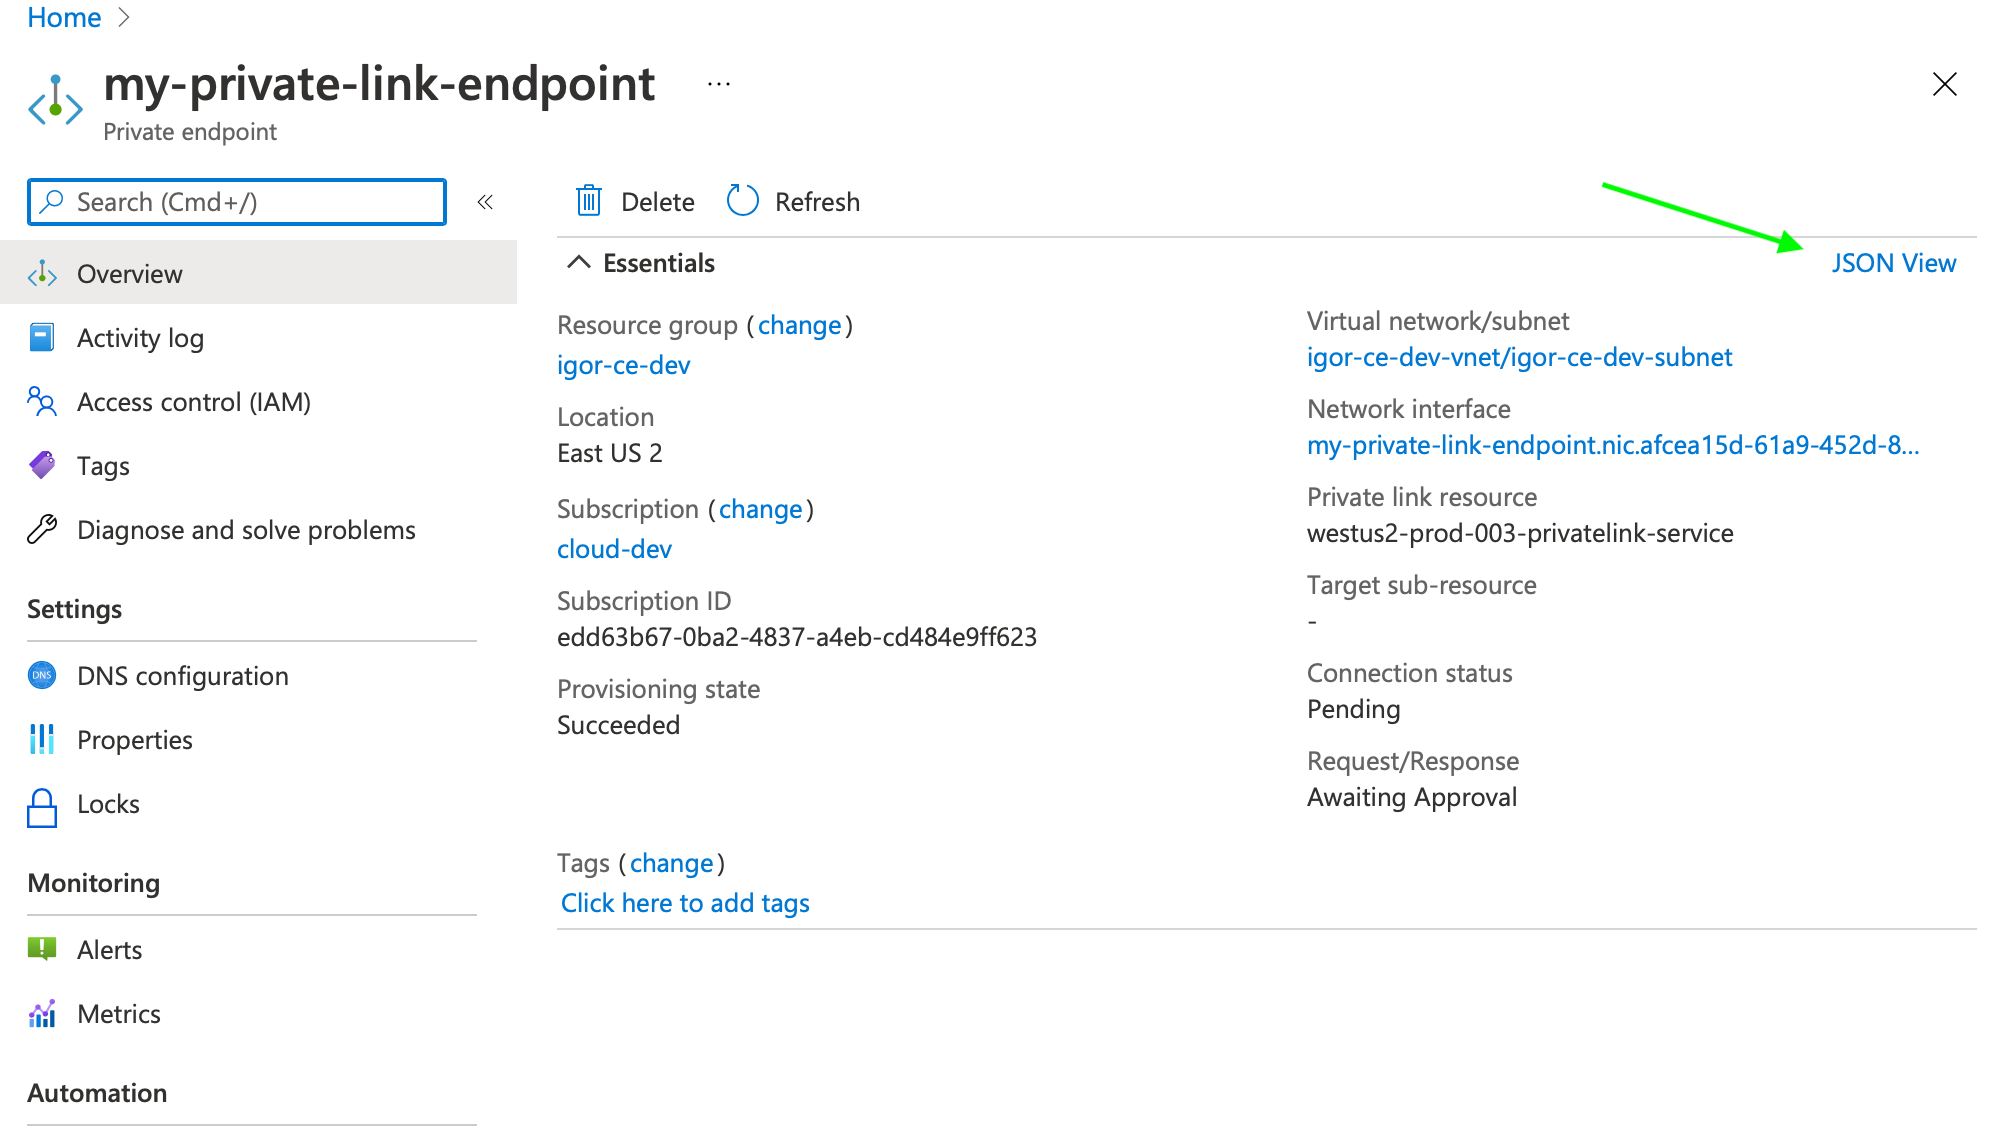 Private endpoint JSON View